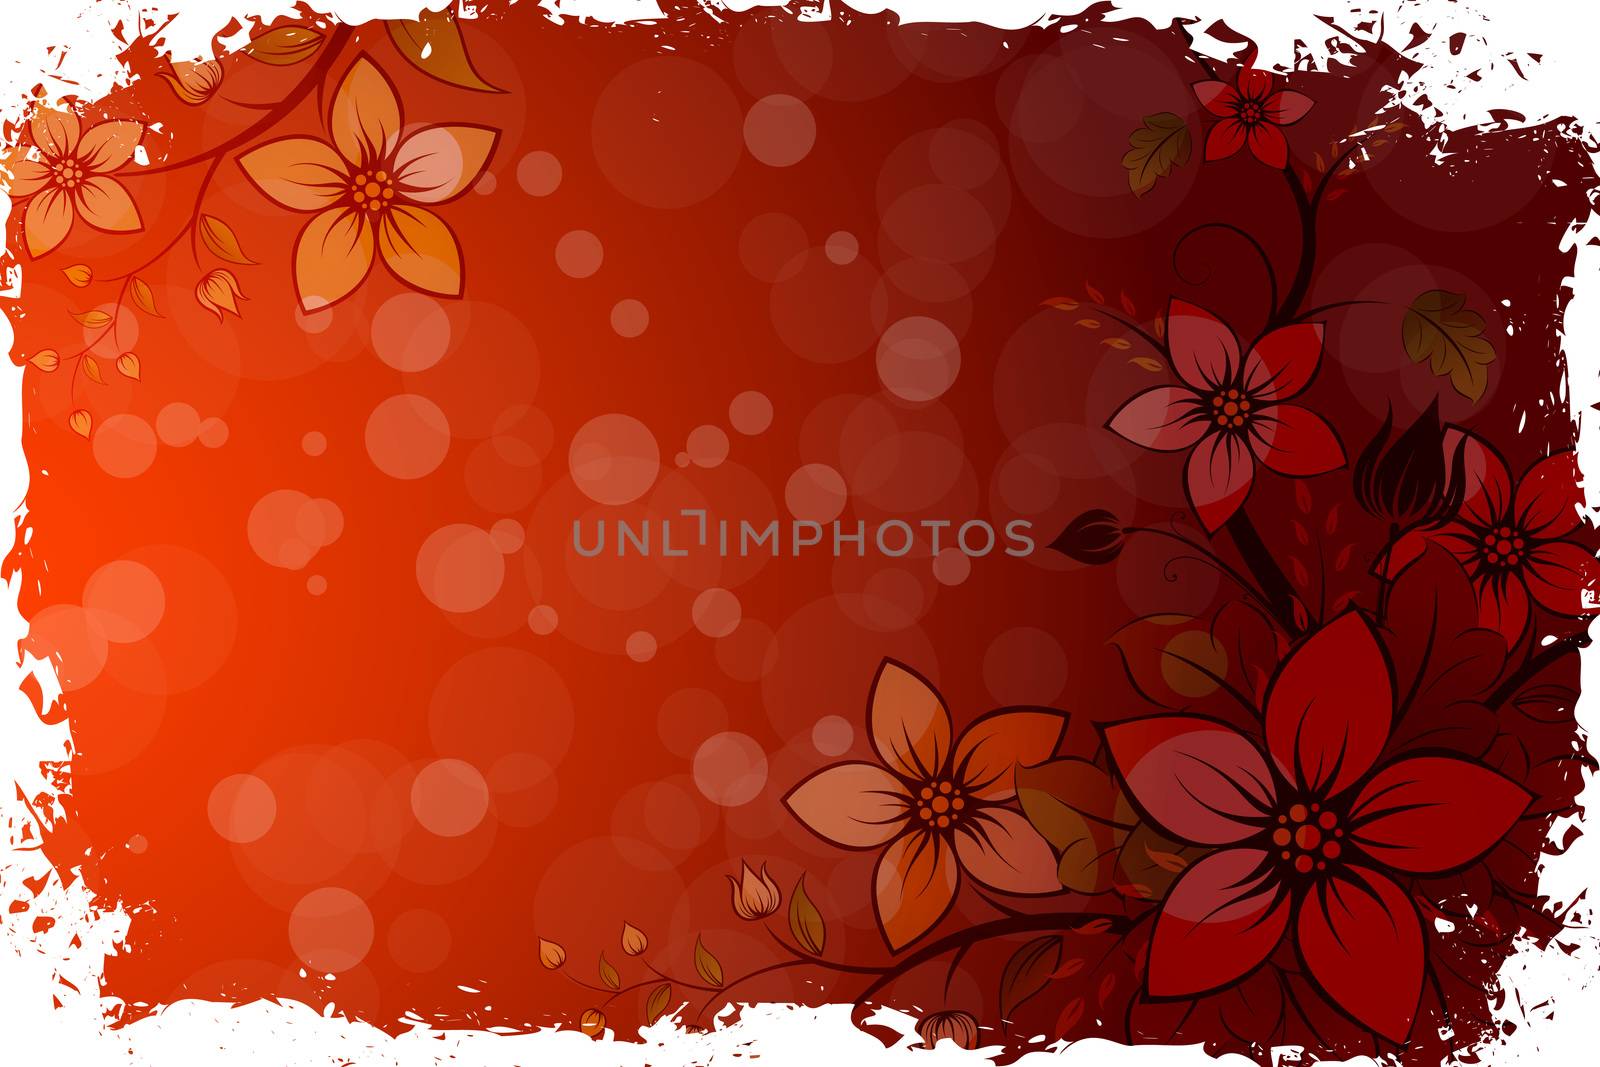 Abstract Grunge Flower Background for Your Design